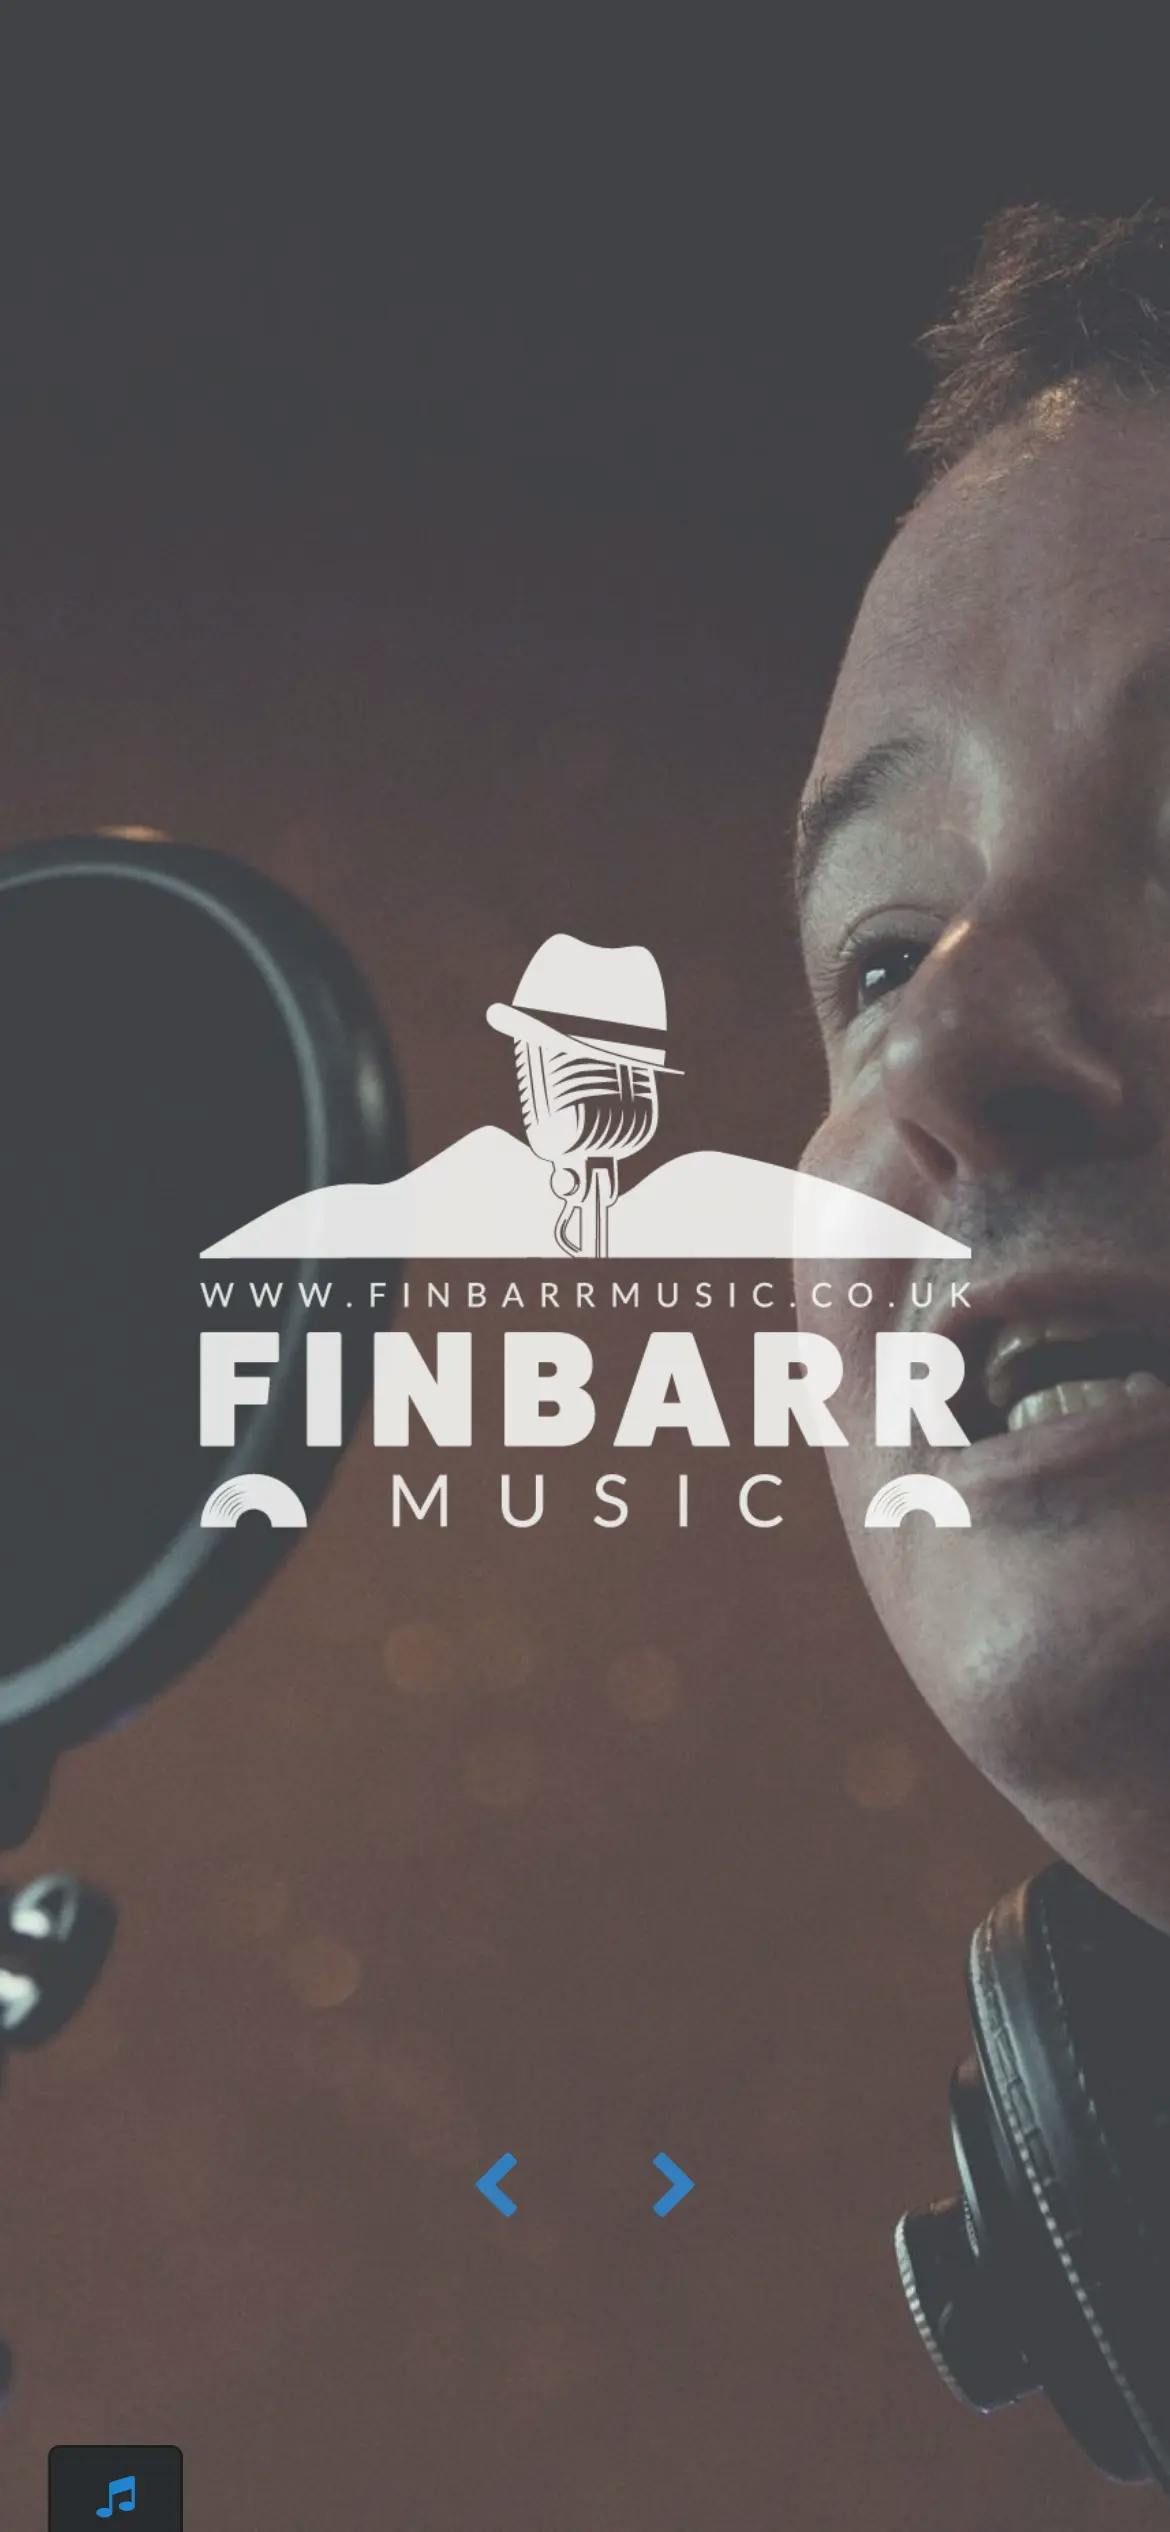 Finbarr Music home page on mobile